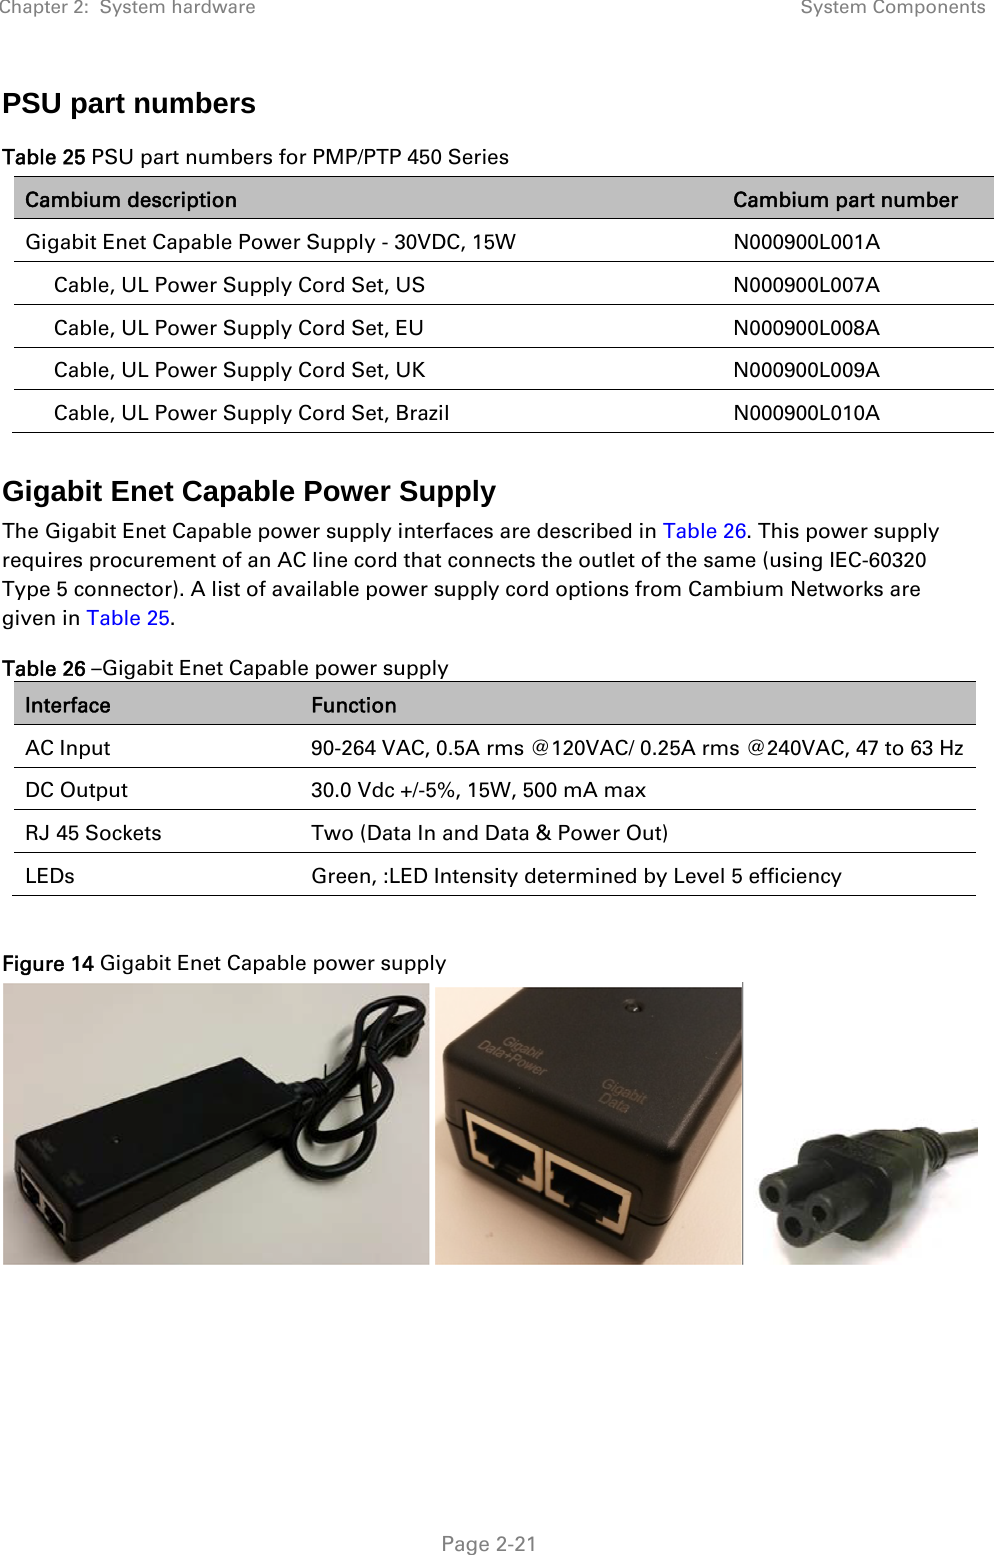 Chapter 2:  System hardware  System Components   Page 2-21 PSU part numbers Table 25 PSU part numbers for PMP/PTP 450 Series Cambium description  Cambium part number Gigabit Enet Capable Power Supply - 30VDC, 15W N000900L001A      Cable, UL Power Supply Cord Set, US  N000900L007A      Cable, UL Power Supply Cord Set, EU  N000900L008A      Cable, UL Power Supply Cord Set, UK  N000900L009A      Cable, UL Power Supply Cord Set, Brazil  N000900L010A  Gigabit Enet Capable Power Supply The Gigabit Enet Capable power supply interfaces are described in Table 26. This power supply requires procurement of an AC line cord that connects the outlet of the same (using IEC-60320 Type 5 connector). A list of available power supply cord options from Cambium Networks are given in Table 25. Table 26 –Gigabit Enet Capable power supply Interface  Function AC Input  90-264 VAC, 0.5A rms @120VAC/ 0.25A rms @240VAC, 47 to 63 Hz DC Output  30.0 Vdc +/-5%, 15W, 500 mA max RJ 45 Sockets  Two (Data In and Data &amp; Power Out) LEDs  Green, :LED Intensity determined by Level 5 efficiency  Figure 14 Gigabit Enet Capable power supply    